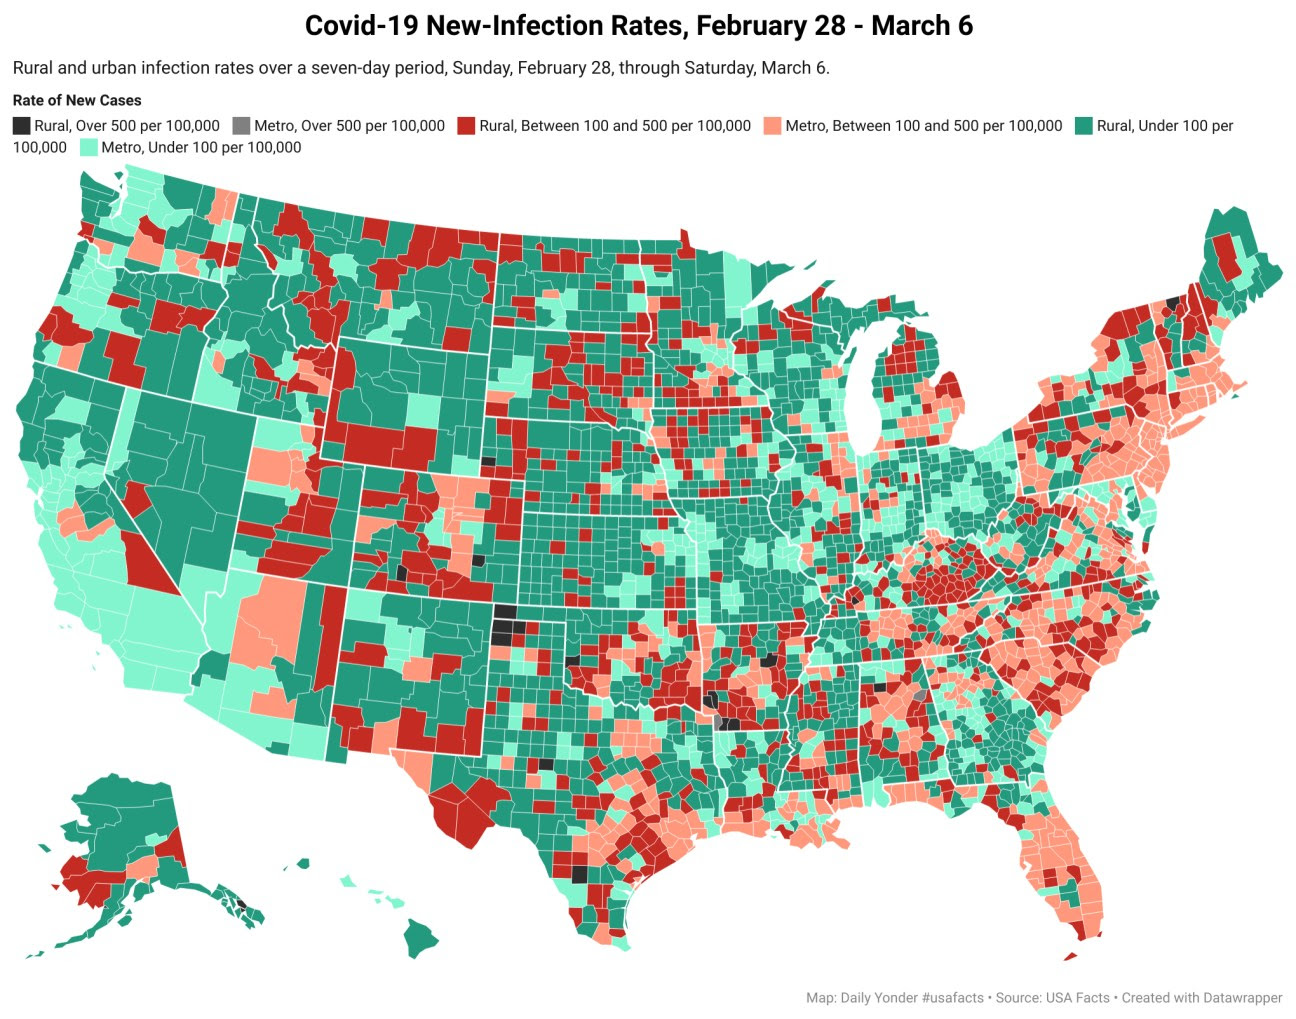 LEDE-covid-19-new-infection-rates-february-28-march-6-nbsp--1296x1019.jpg